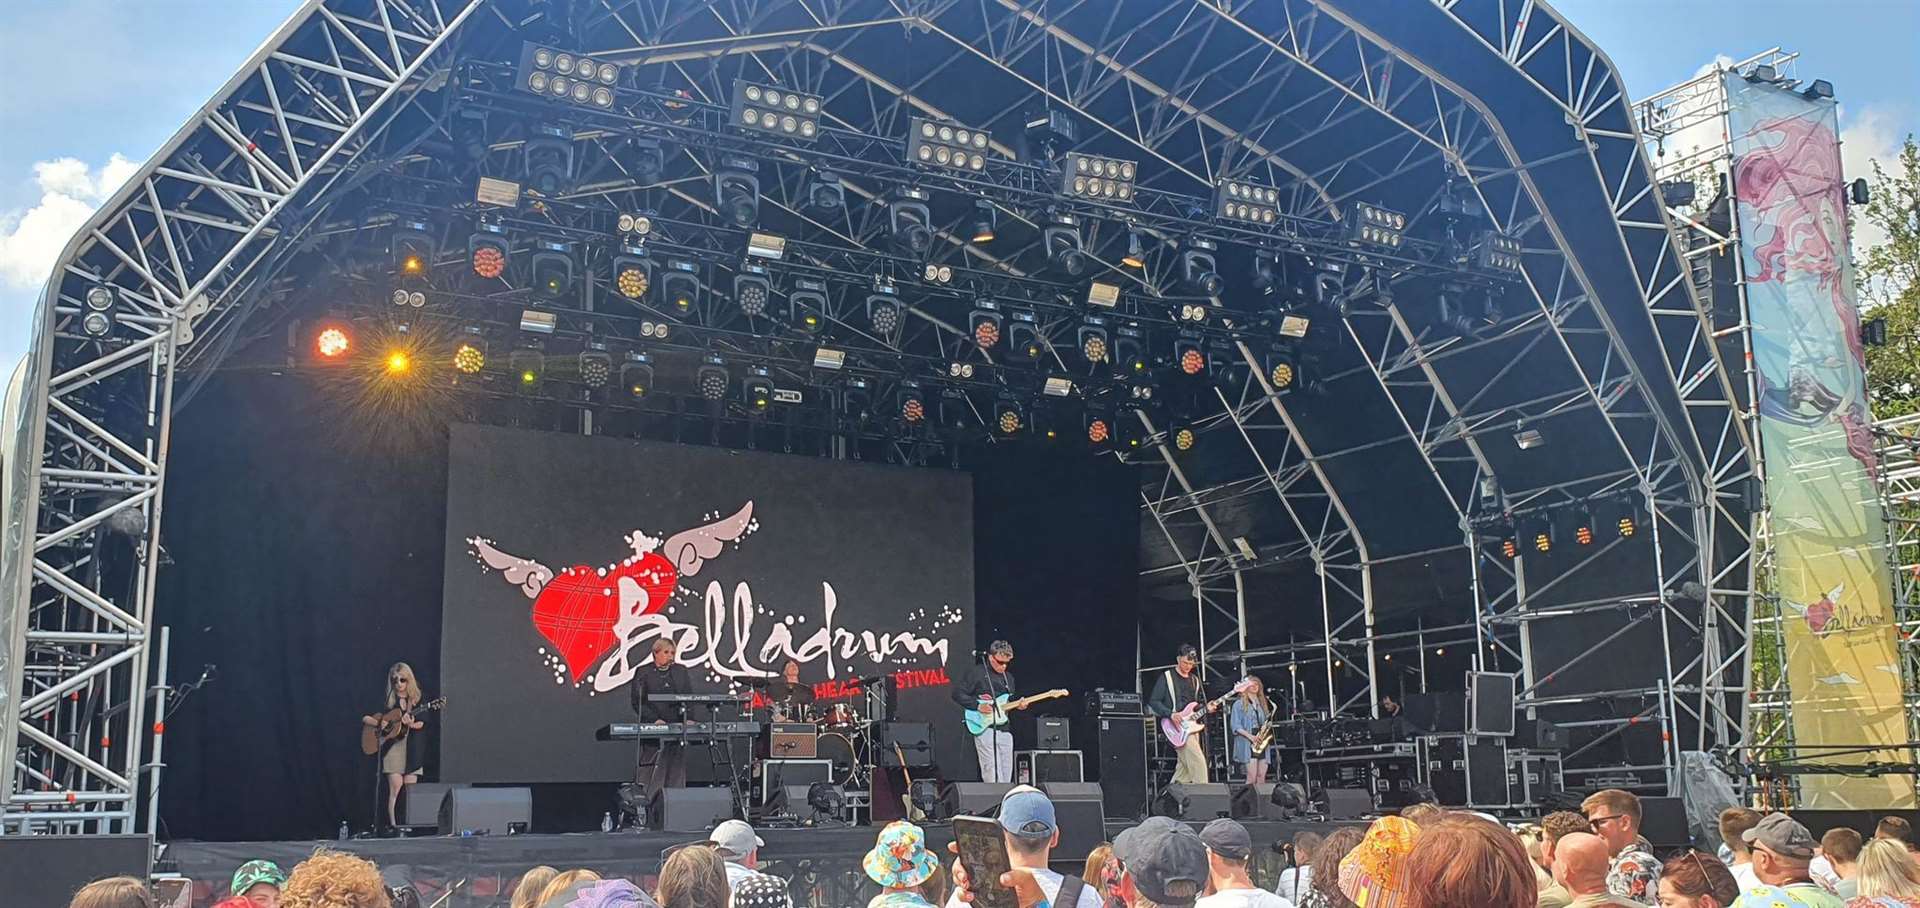 The Roov in action on Belladrum's main stage.